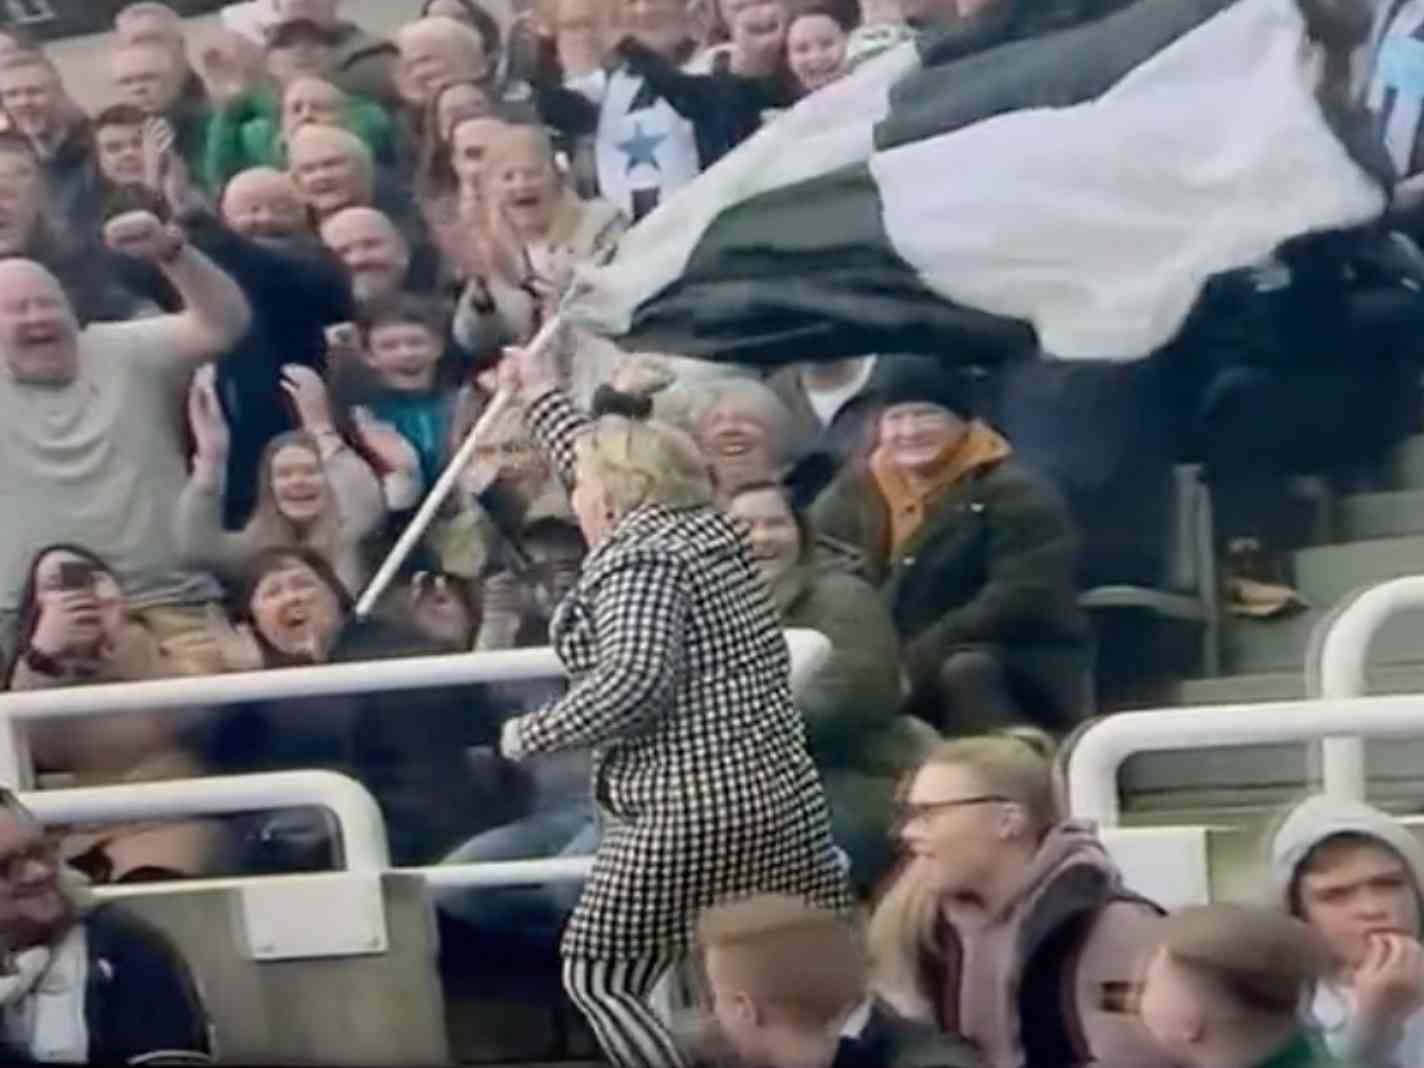 Celebrating the Elderly Lady Who Stole the Show with a Newcastle Flag in Hand